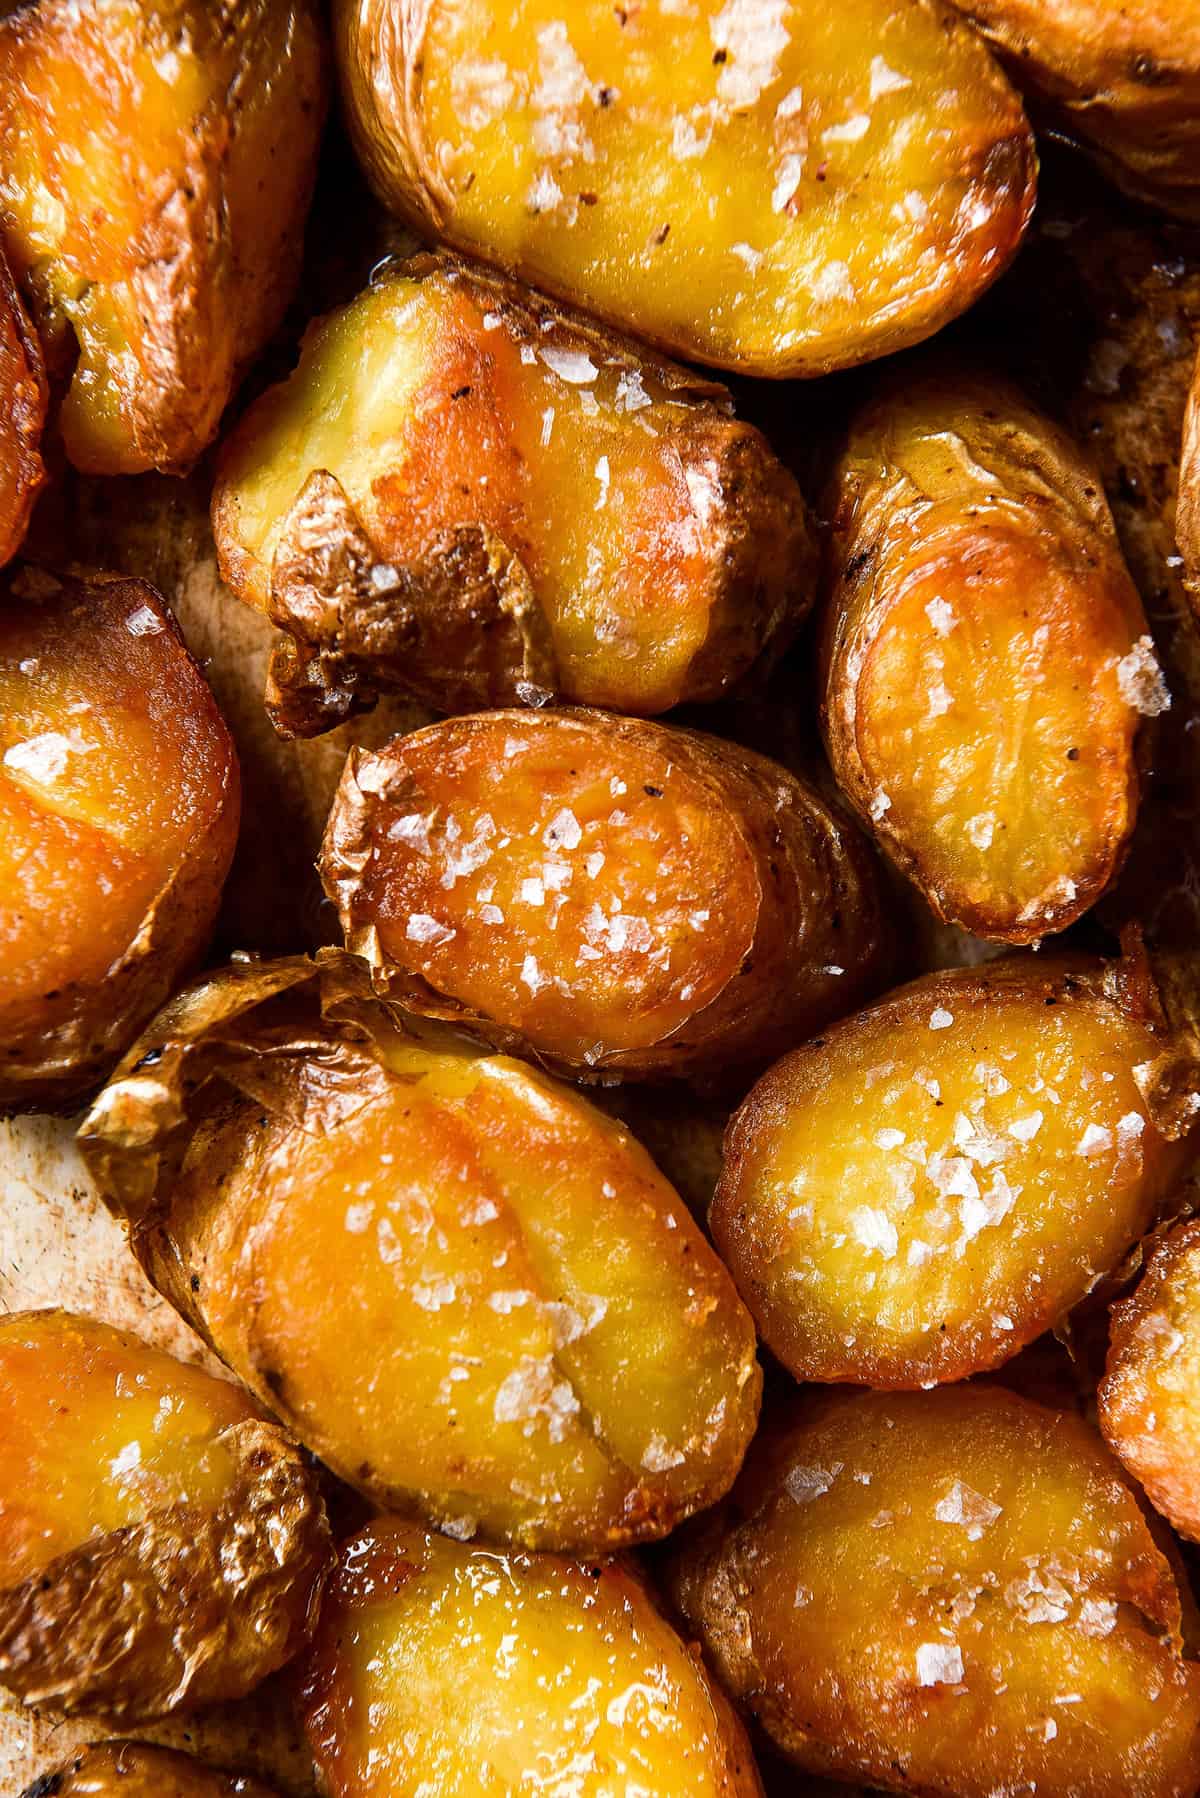 A macro close up image of crispy Kipfler potatoes on a mottled oven tray. The potatoes are golden brown and topped with sea salt flakes.